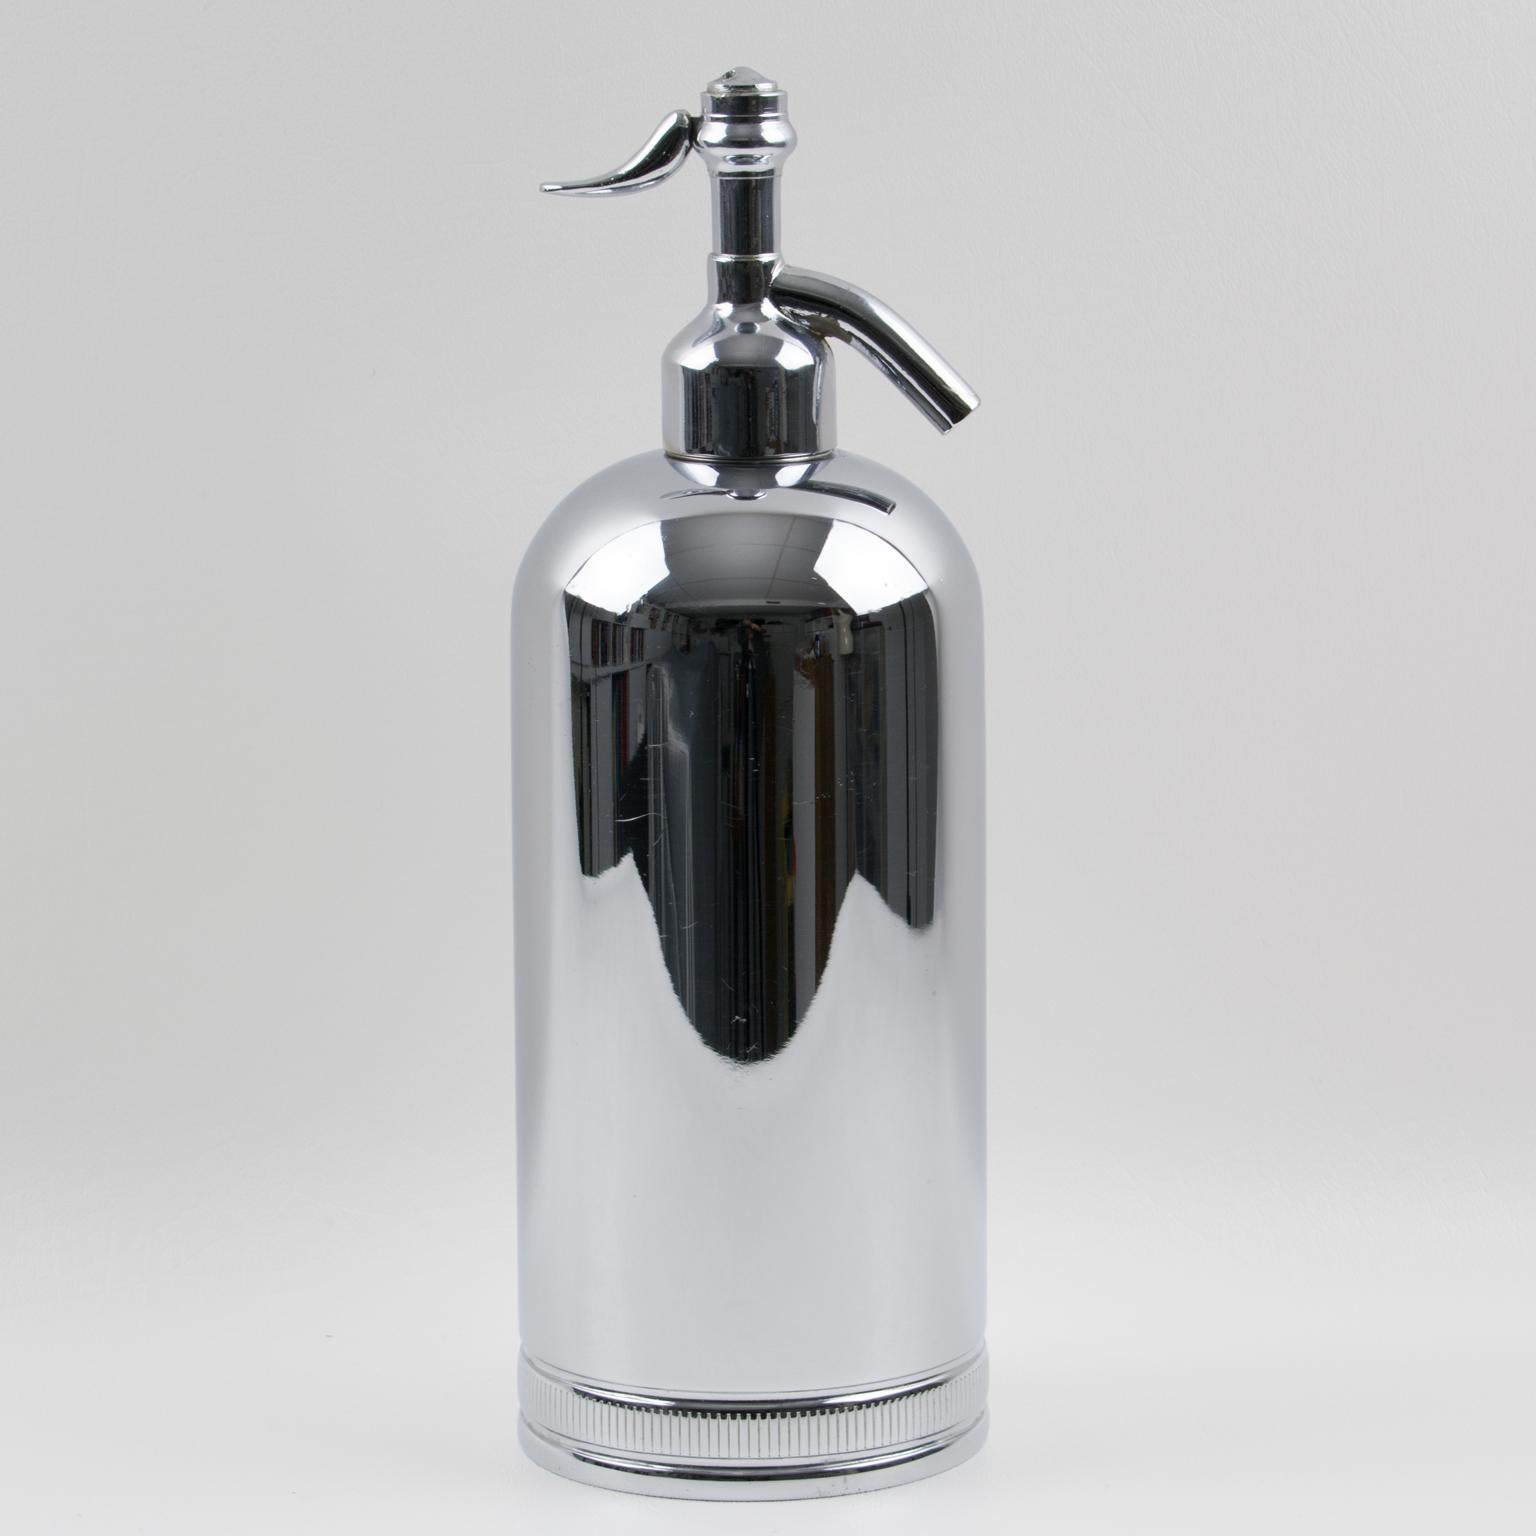 Mid-20th Century 1950s French Soda Siphon Seltzer Water Bottle